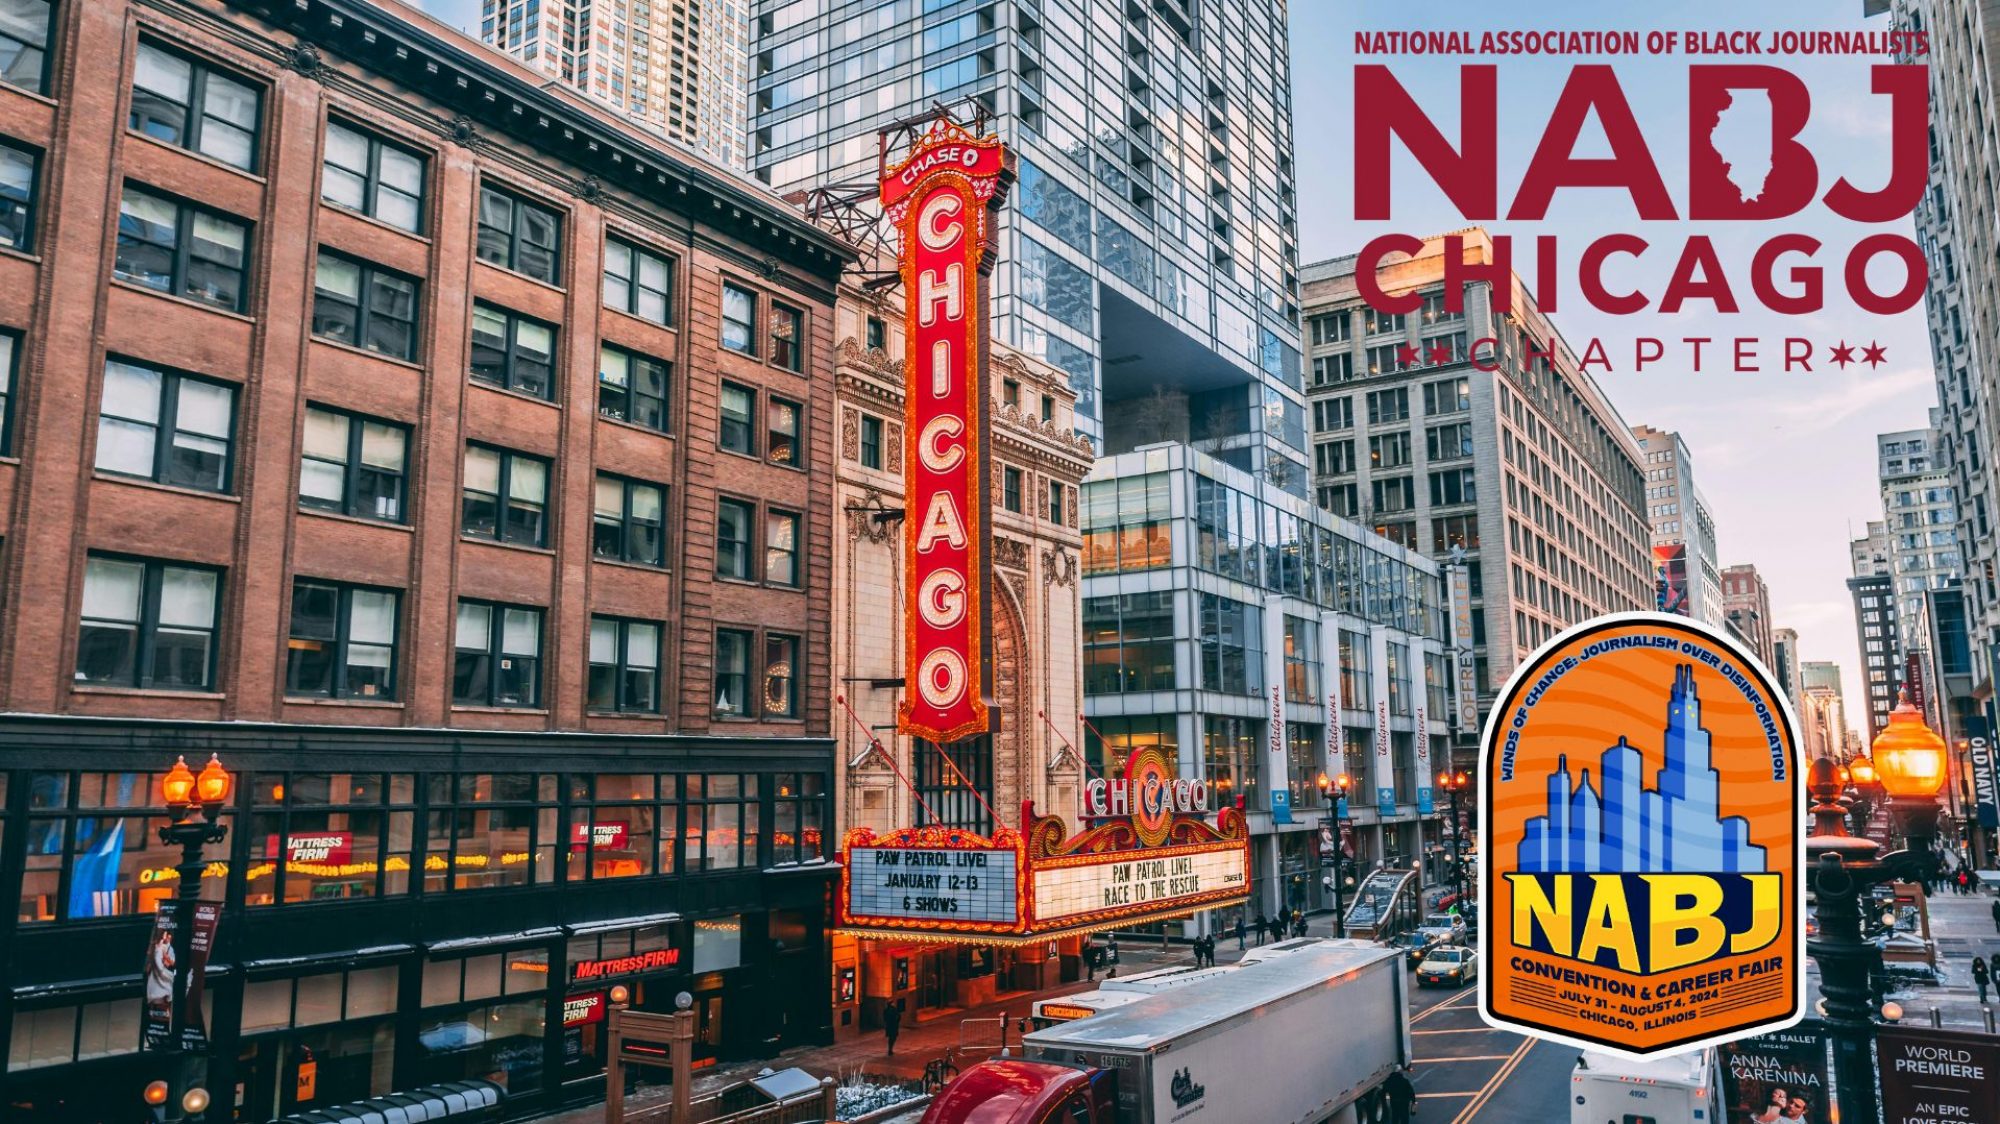 National Association of Black Journalists-Chicago Chapter